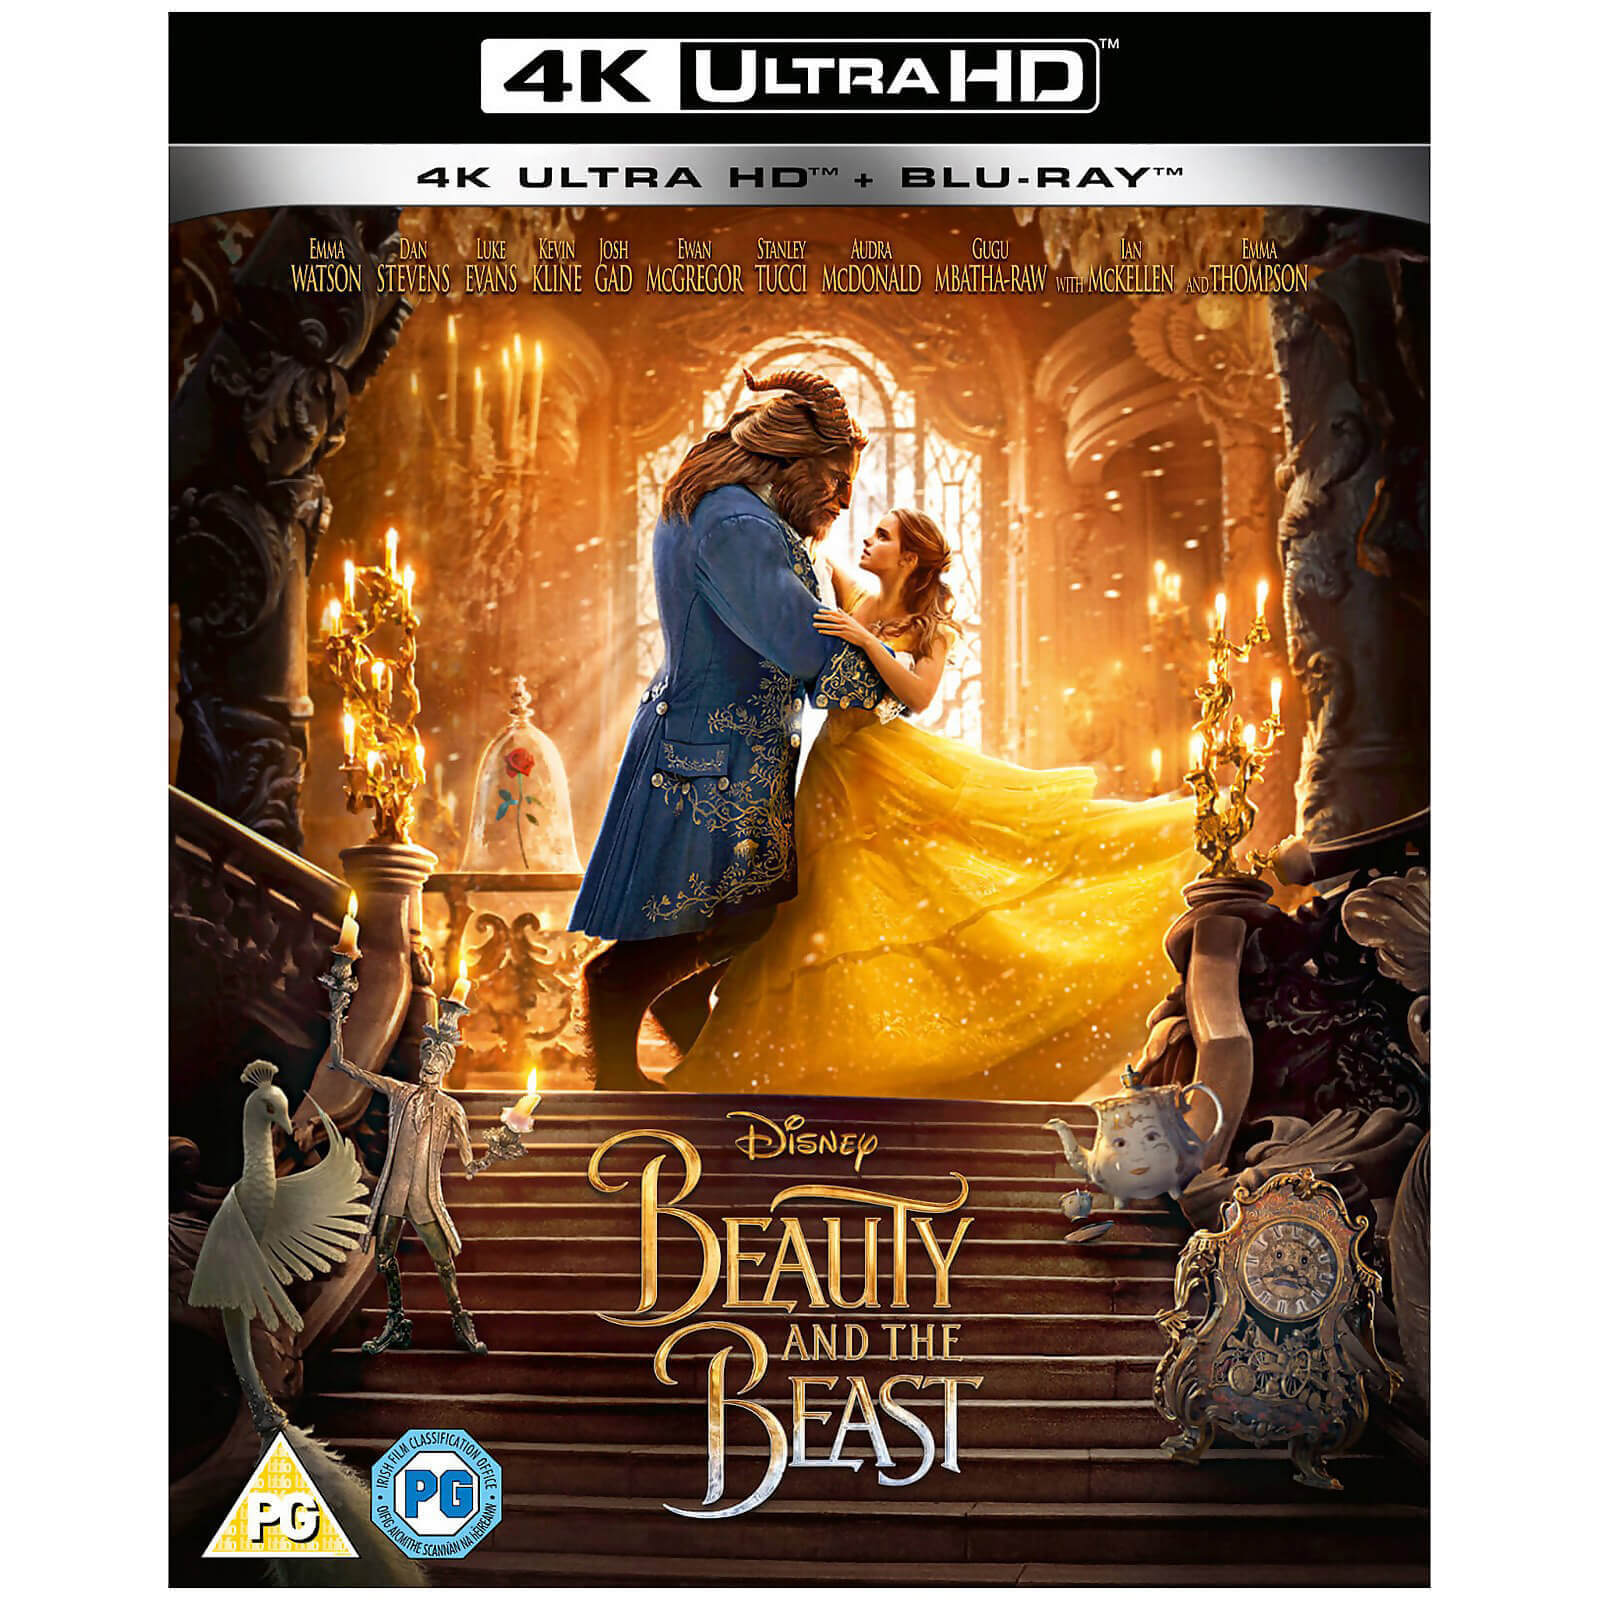 Beauty and the Beast (Live Action) 4K Ultra HD (Includes 2D Blu-ray)